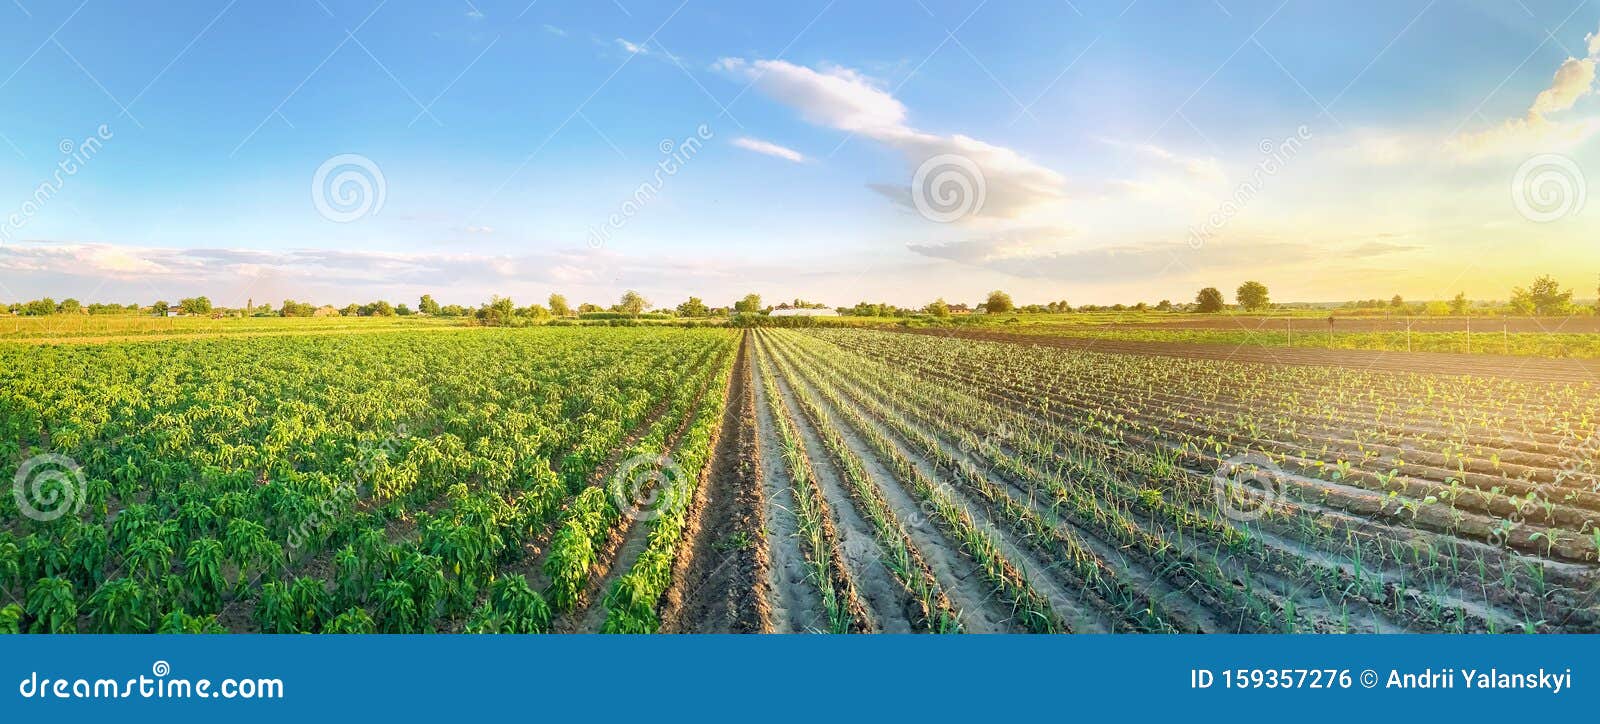 panoramic photo of a beautiful agricultural view with pepper and leek plantations. agriculture and farming. agribusiness. agro